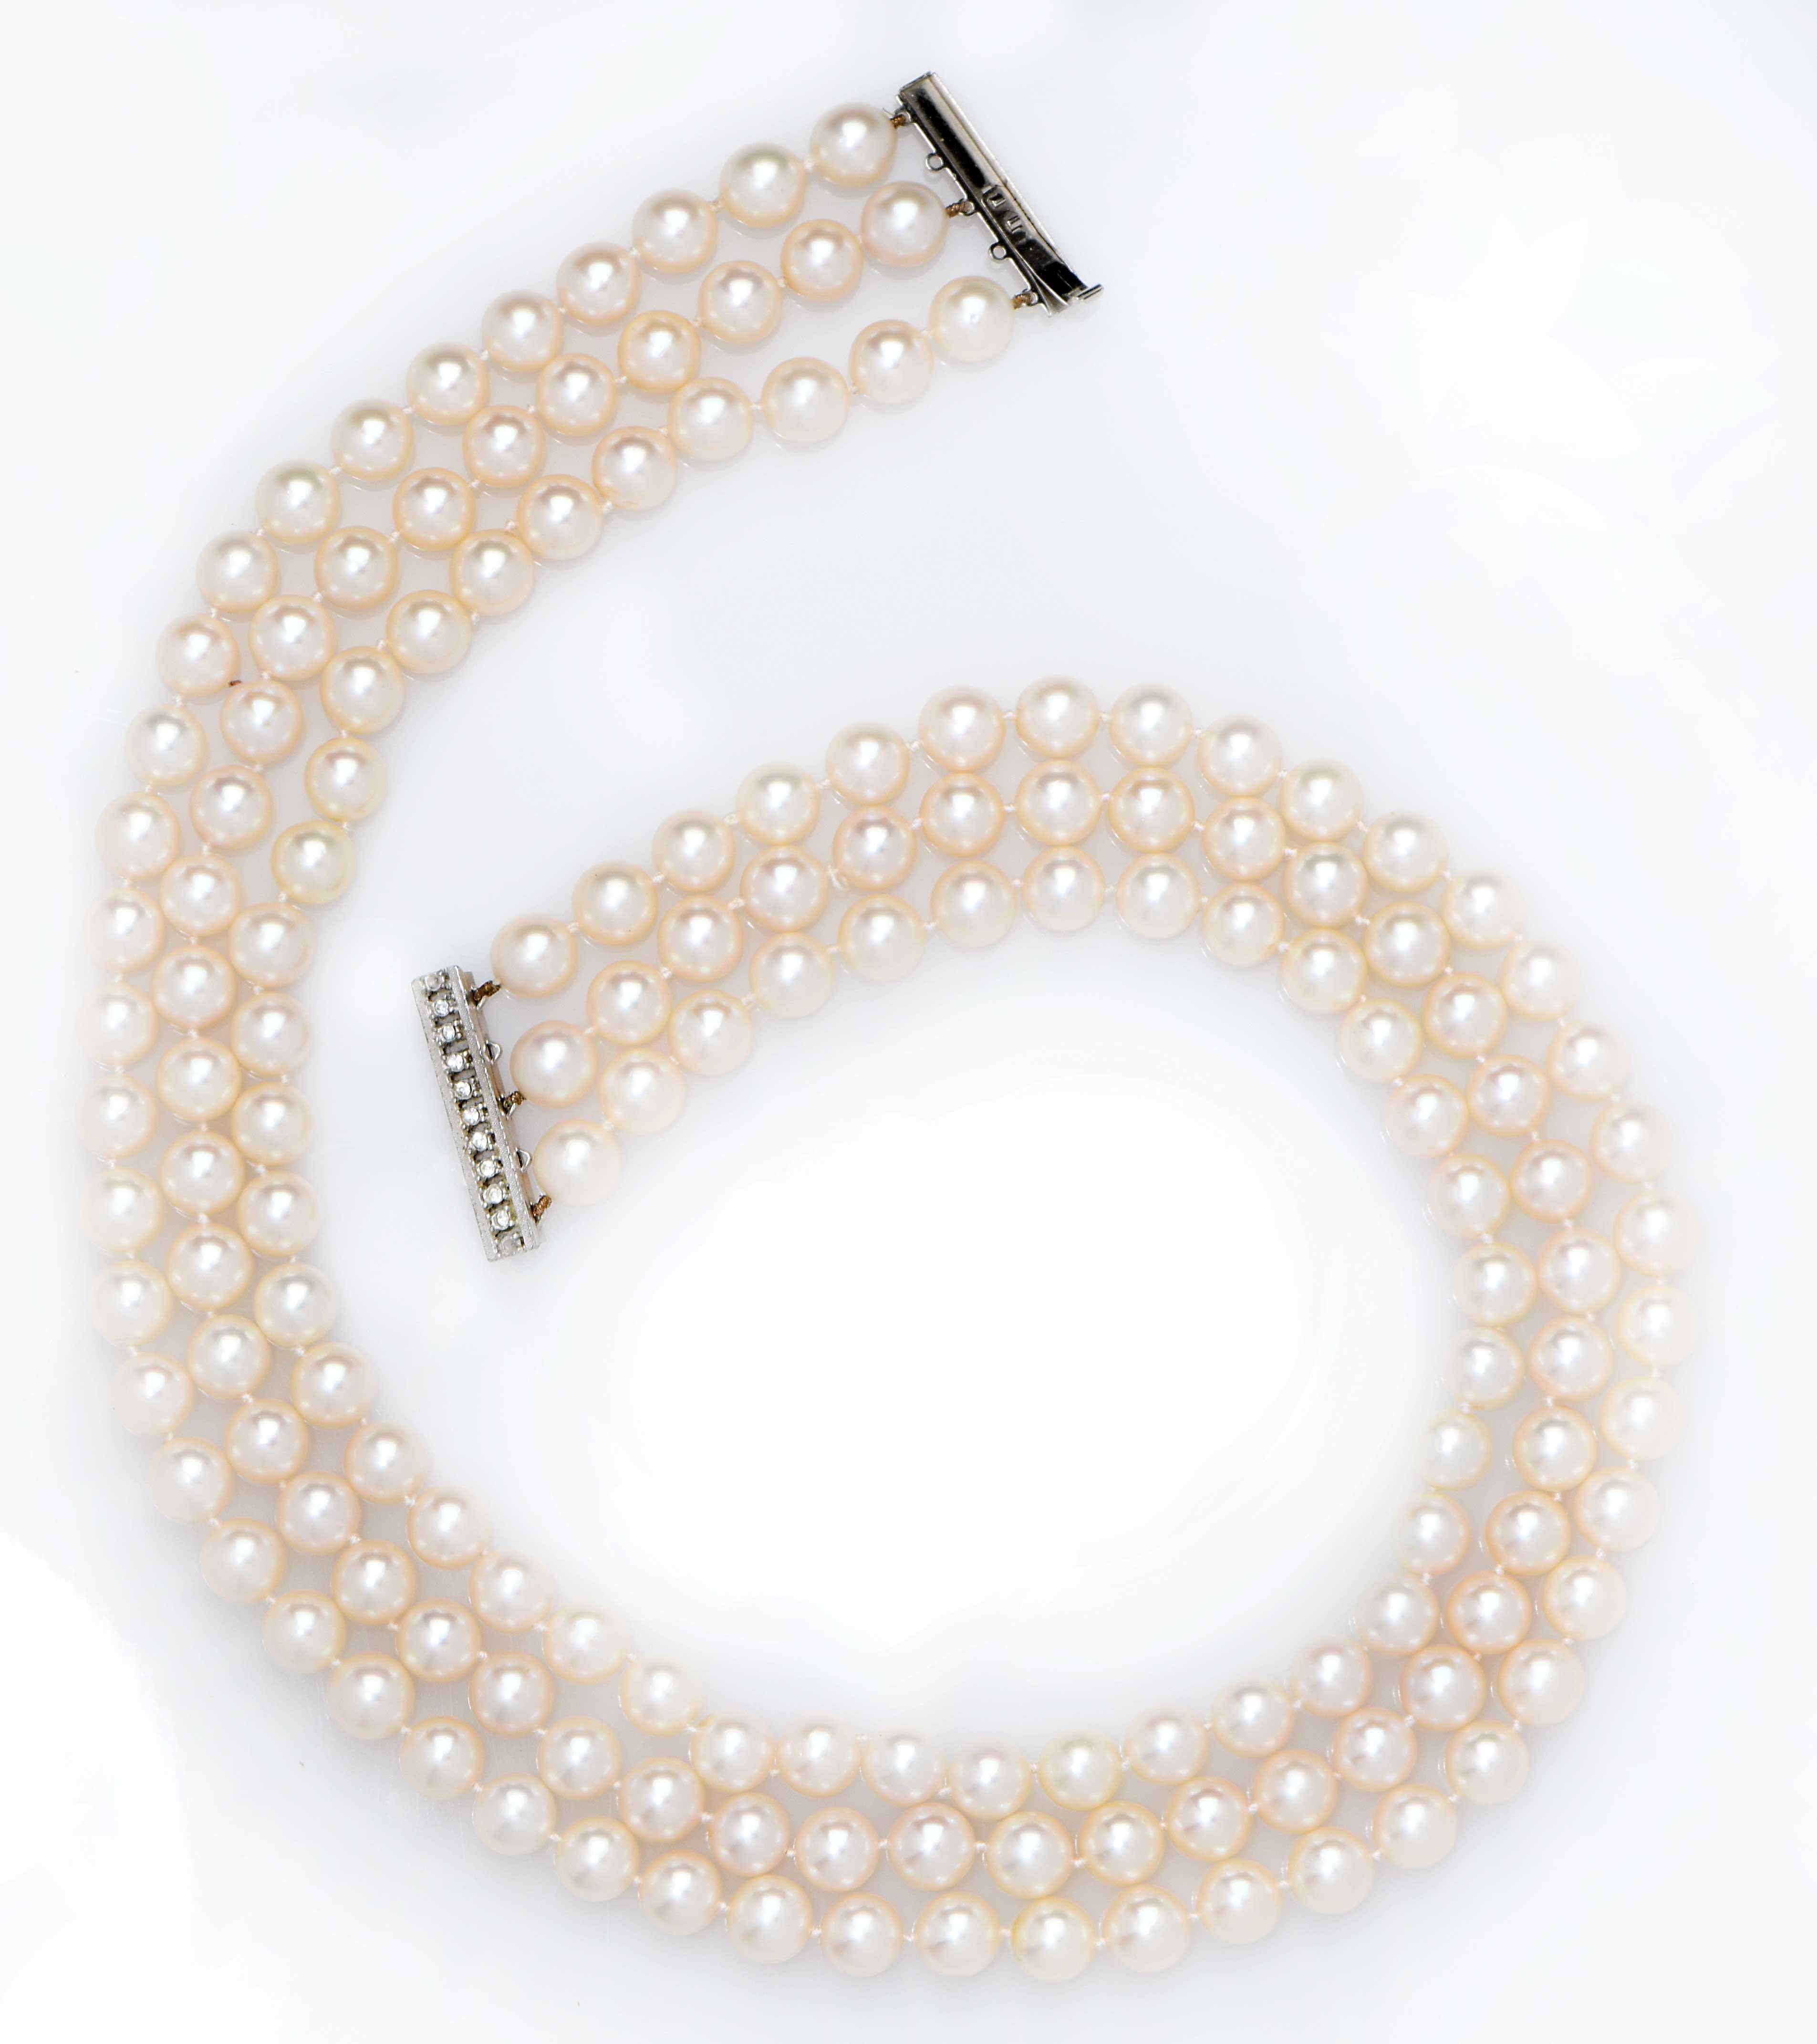 Modern Great Quality Akoya Triple Row Cultured Pearl Necklace with Diamond Clasp